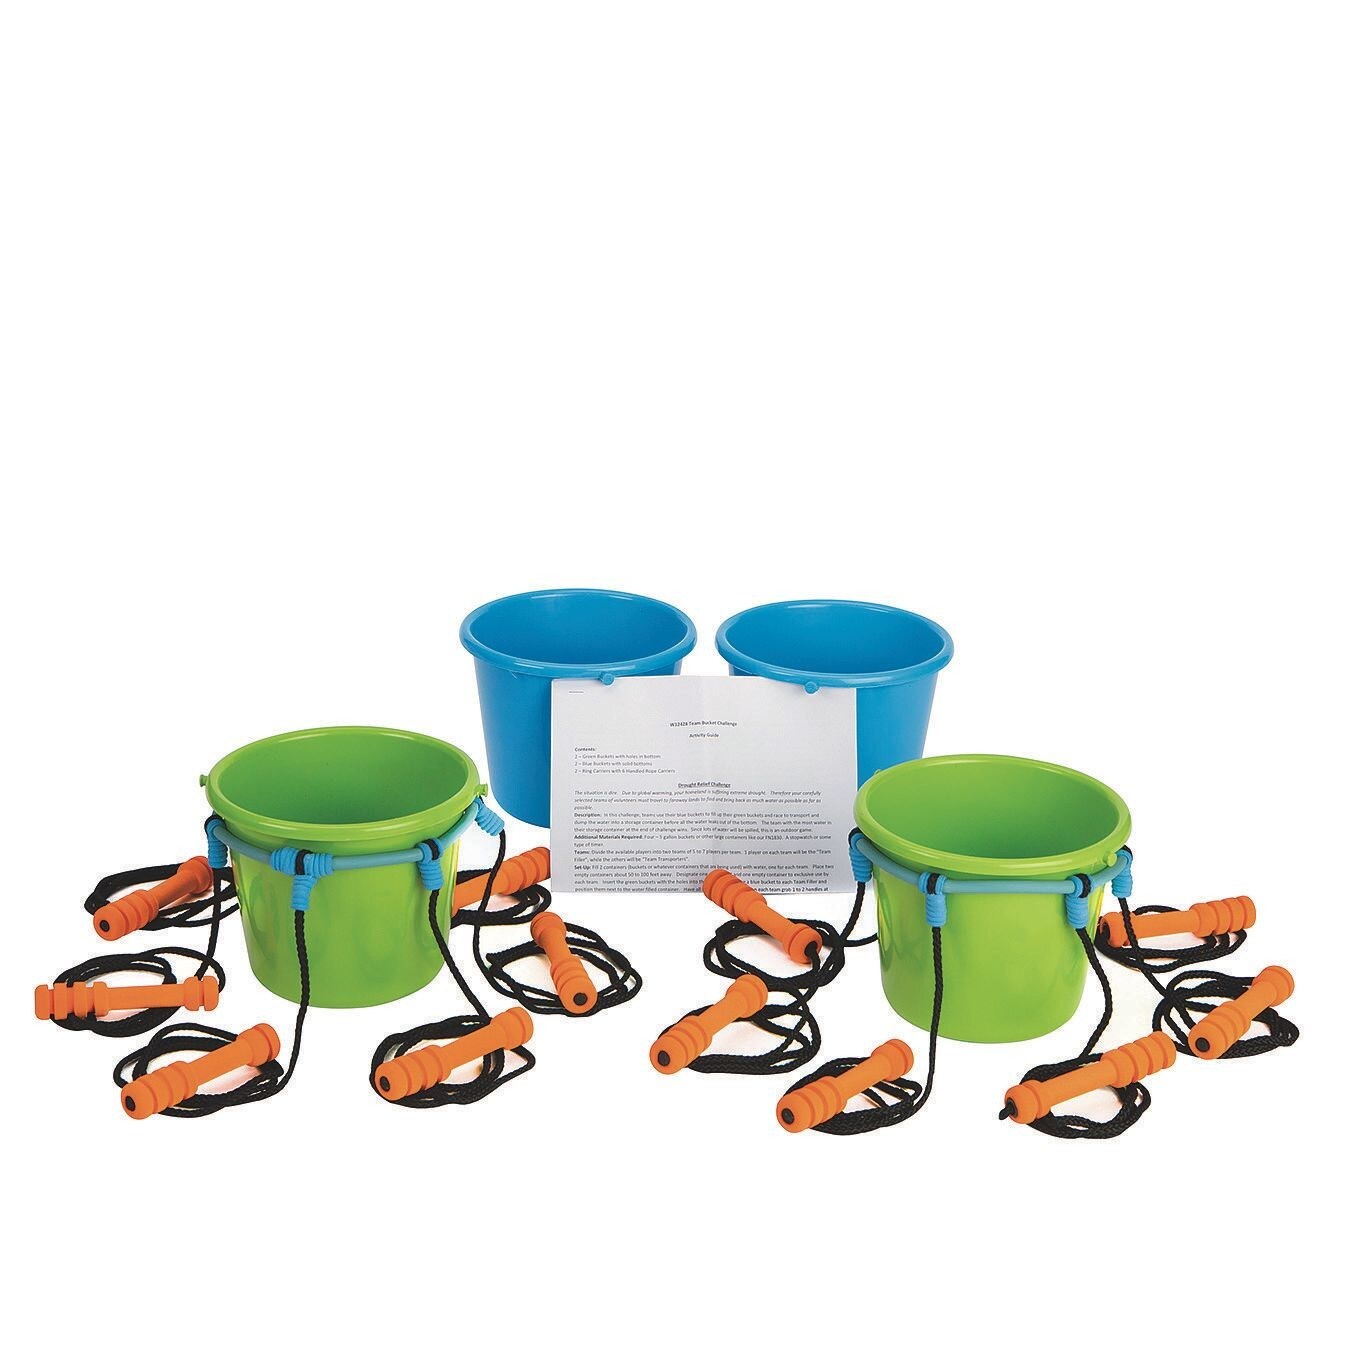 S&#x26;S Worldwide Team Bucket Challenge. Team Building Activity for 8 to 24 Kids or Adults with 4 Buckets, 2 Bucket Holding Rings, 6 Carry Ropes Per Ring and Activity Guide. Great for Field Days.